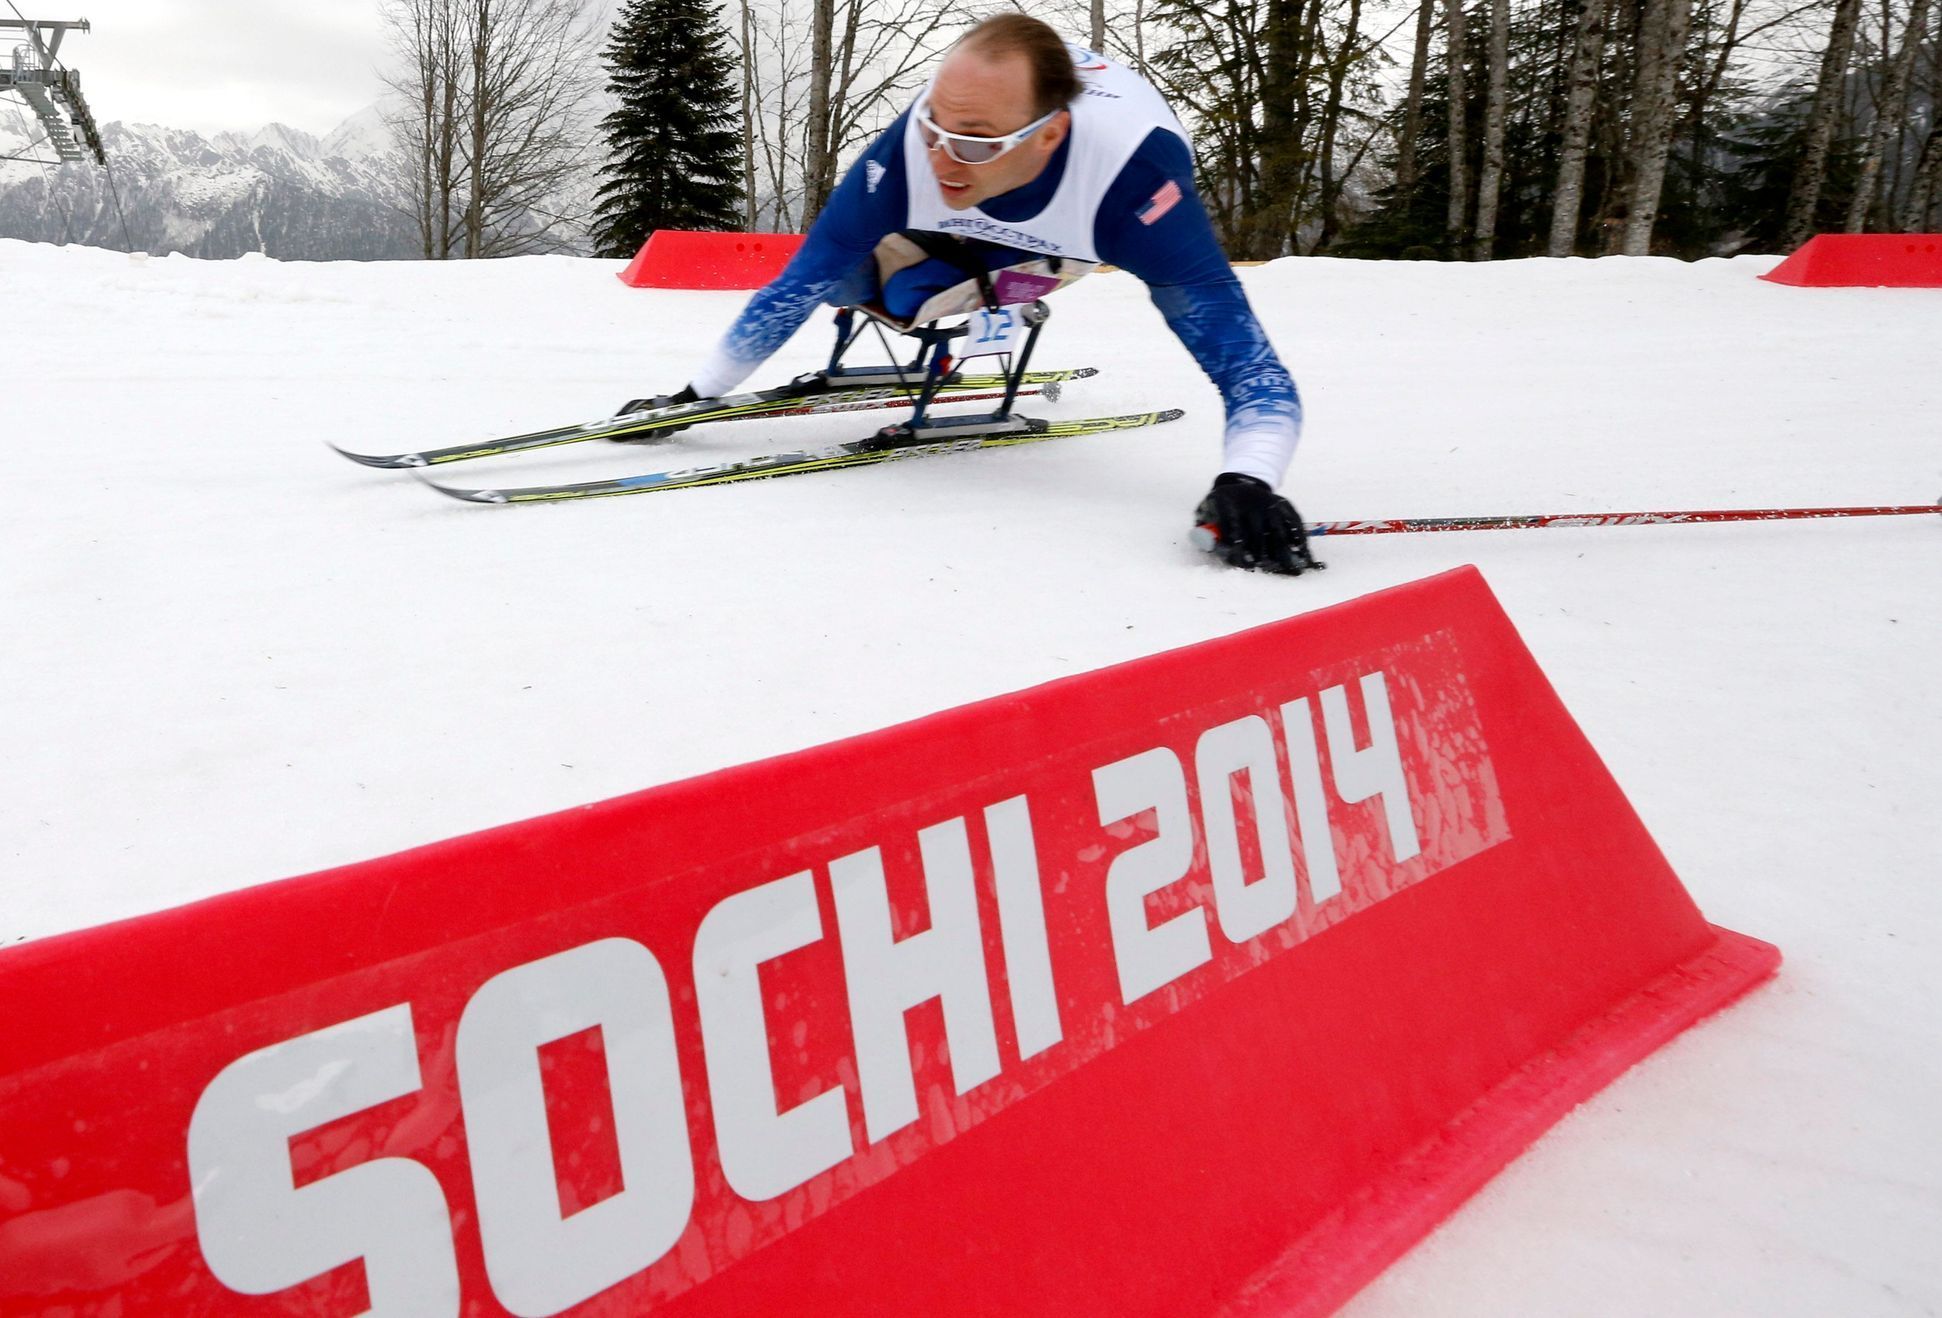 Andrew of the U.S skis during the men's 15 km cross-country sitting at the 2014 Sochi Paralympic Winter Games in Rosa Khutor